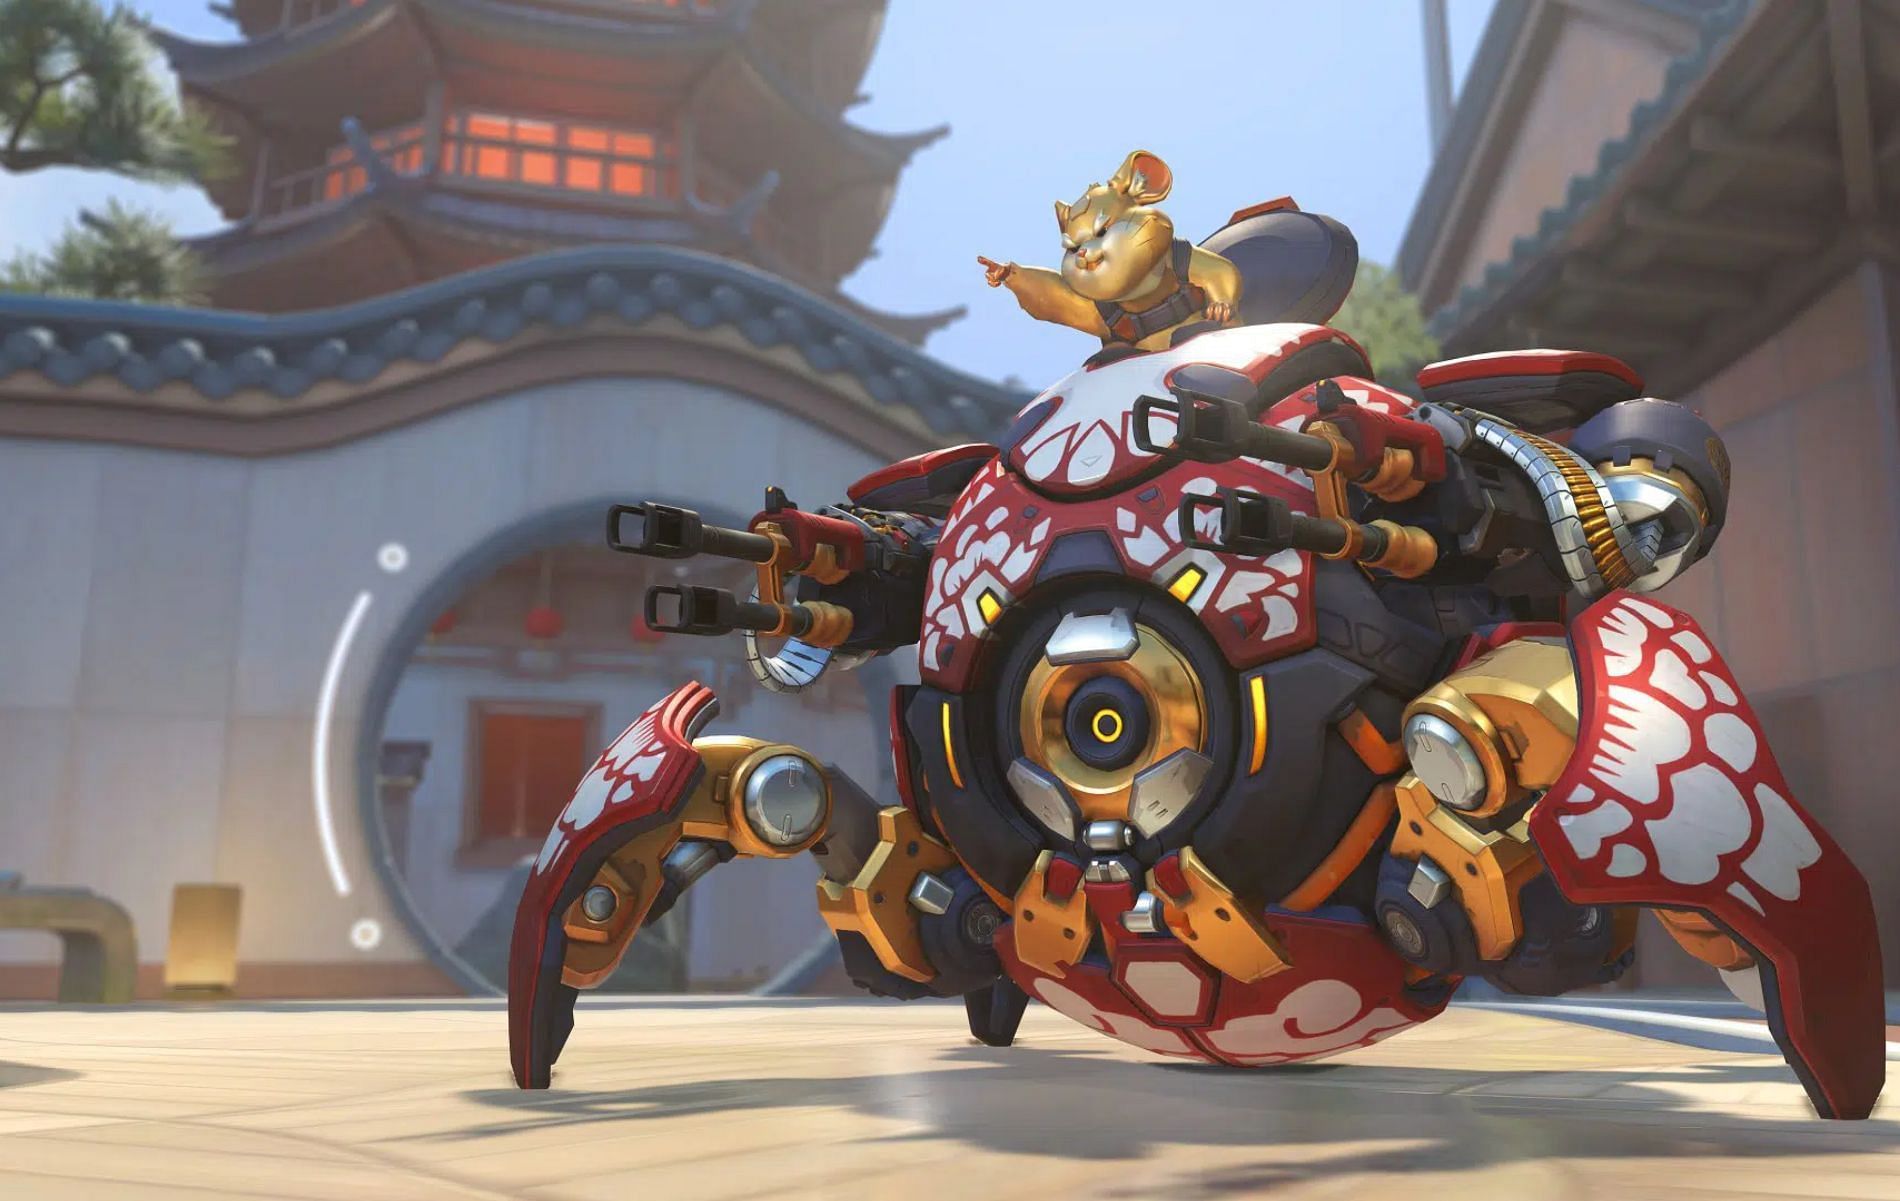 Wrecking Ball is not only sturdy but also possesses mines and a self-destruct ability (Image via Blizzard Entertainment)